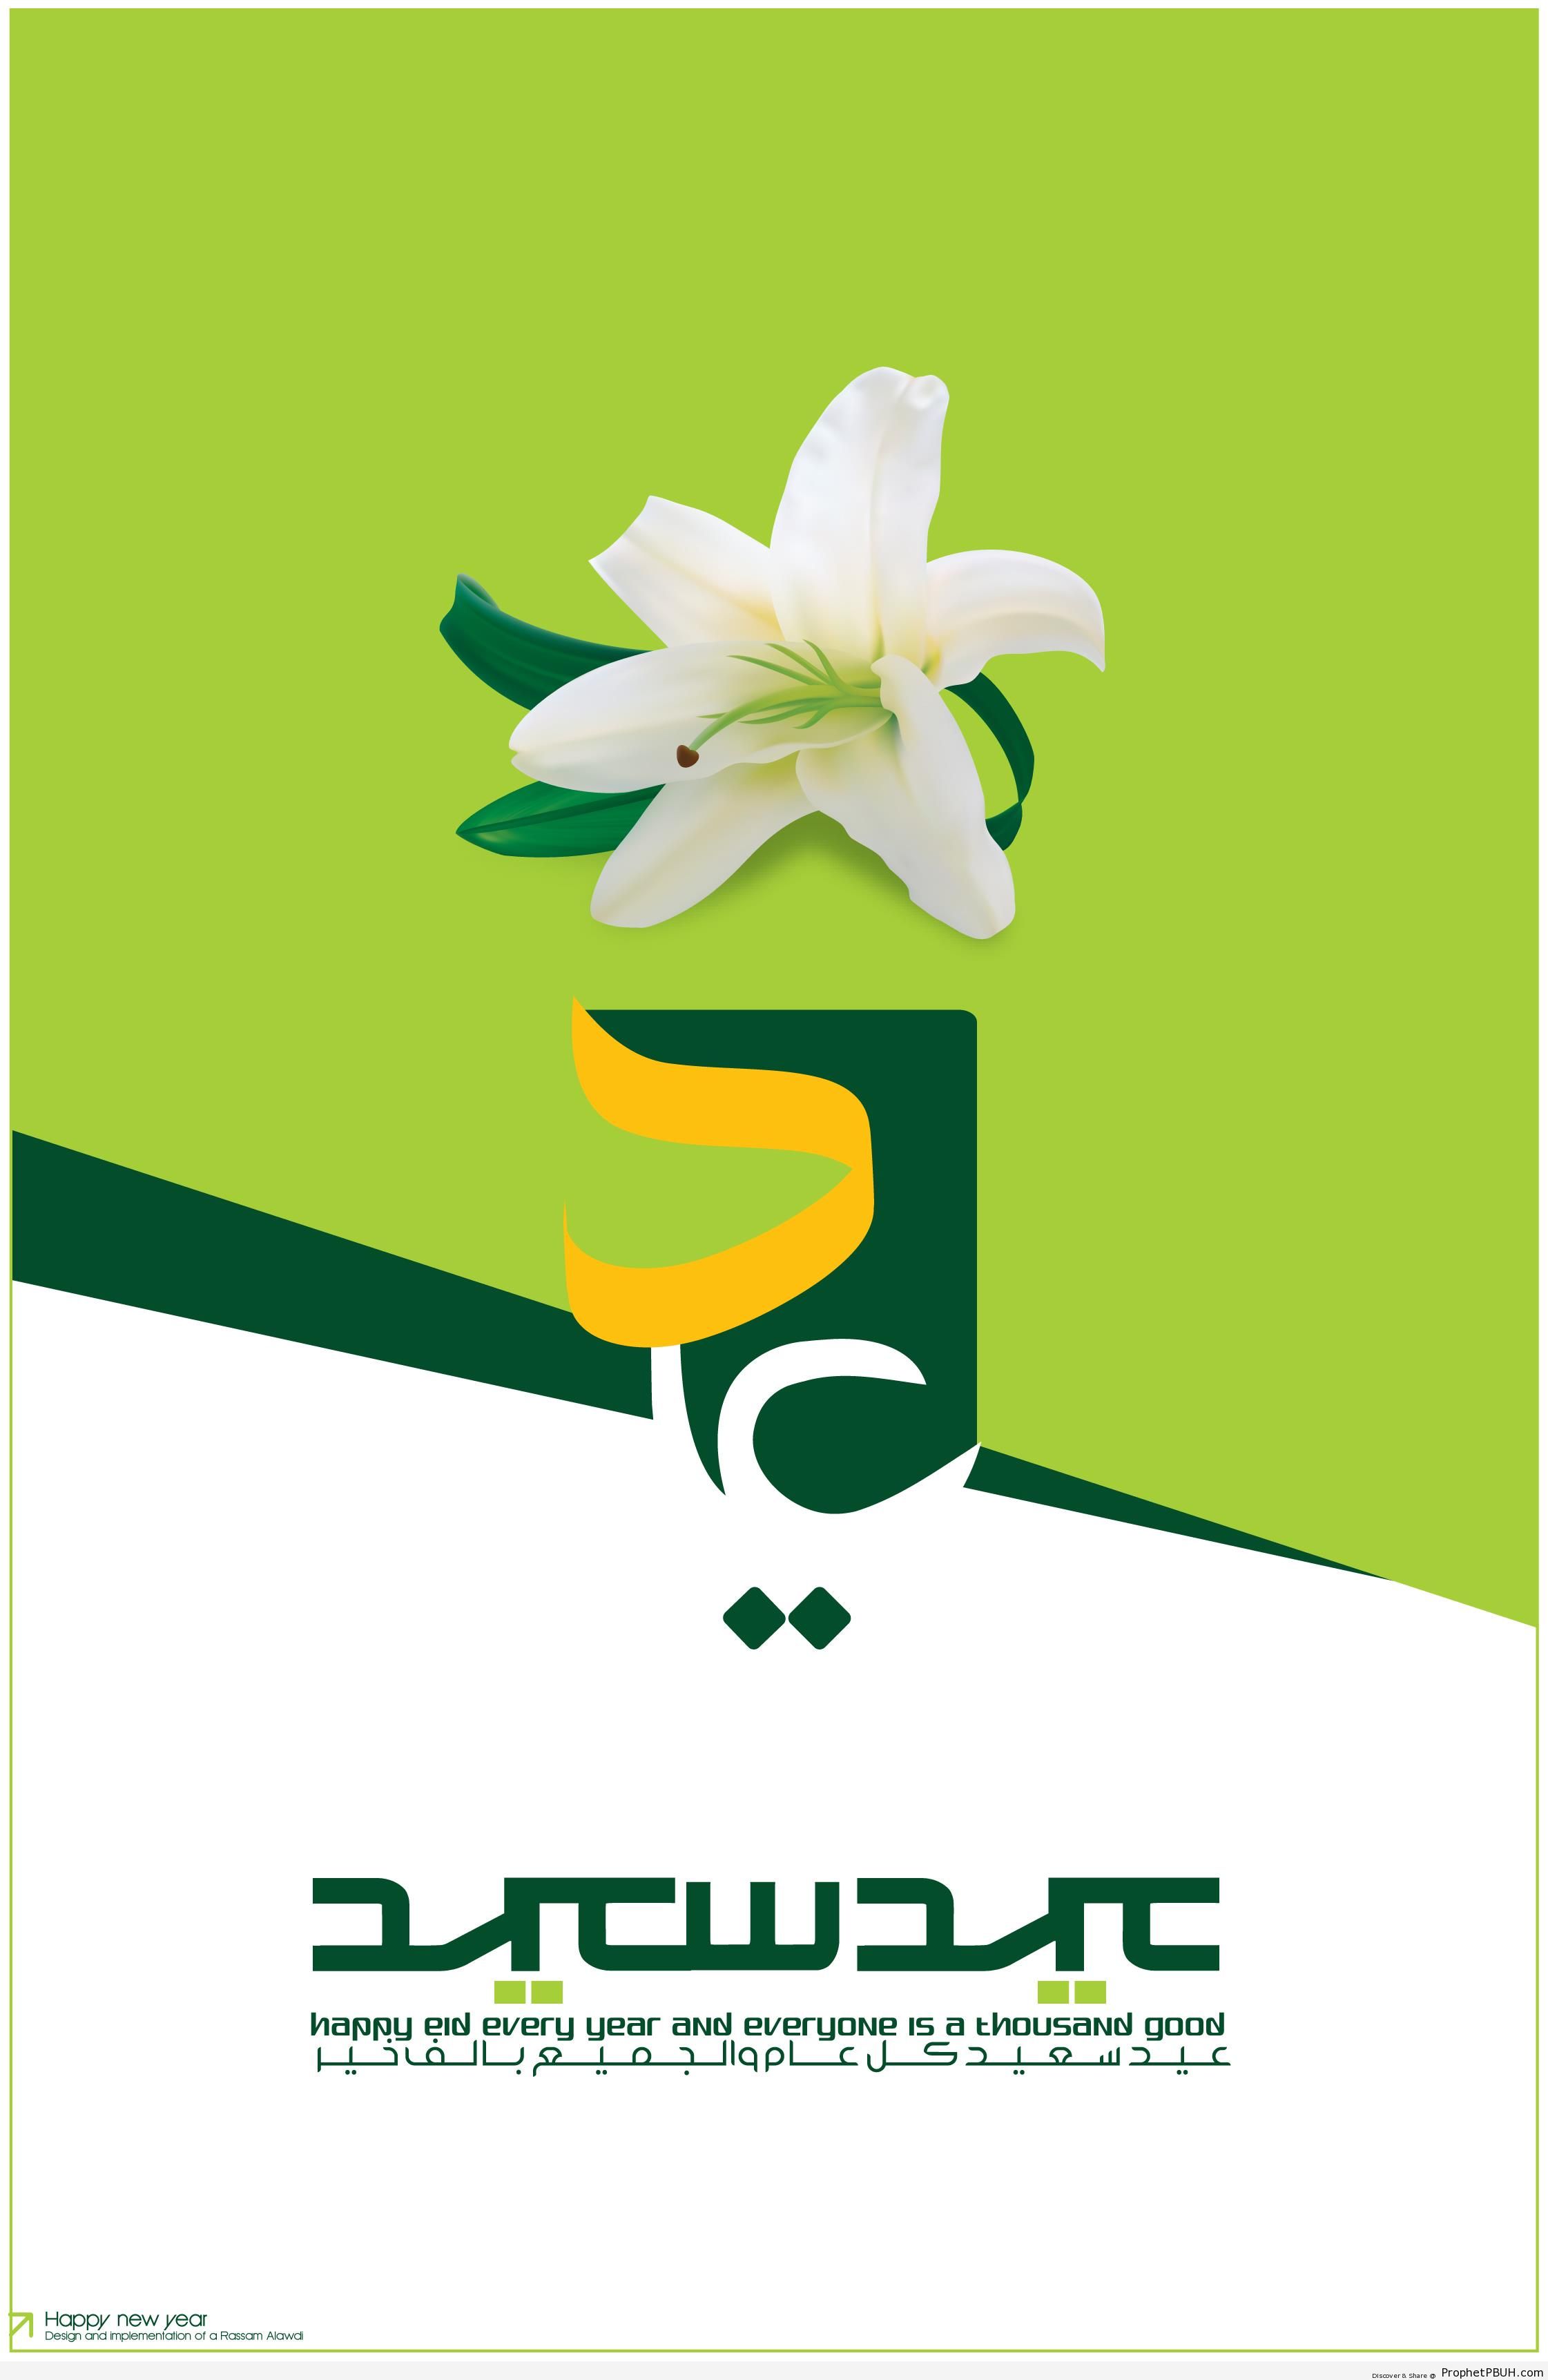 Happy Eid Greeting with Flower on White and Green Background - Eid Mubarak Greeting Cards, Graphics, and Wallpapers 